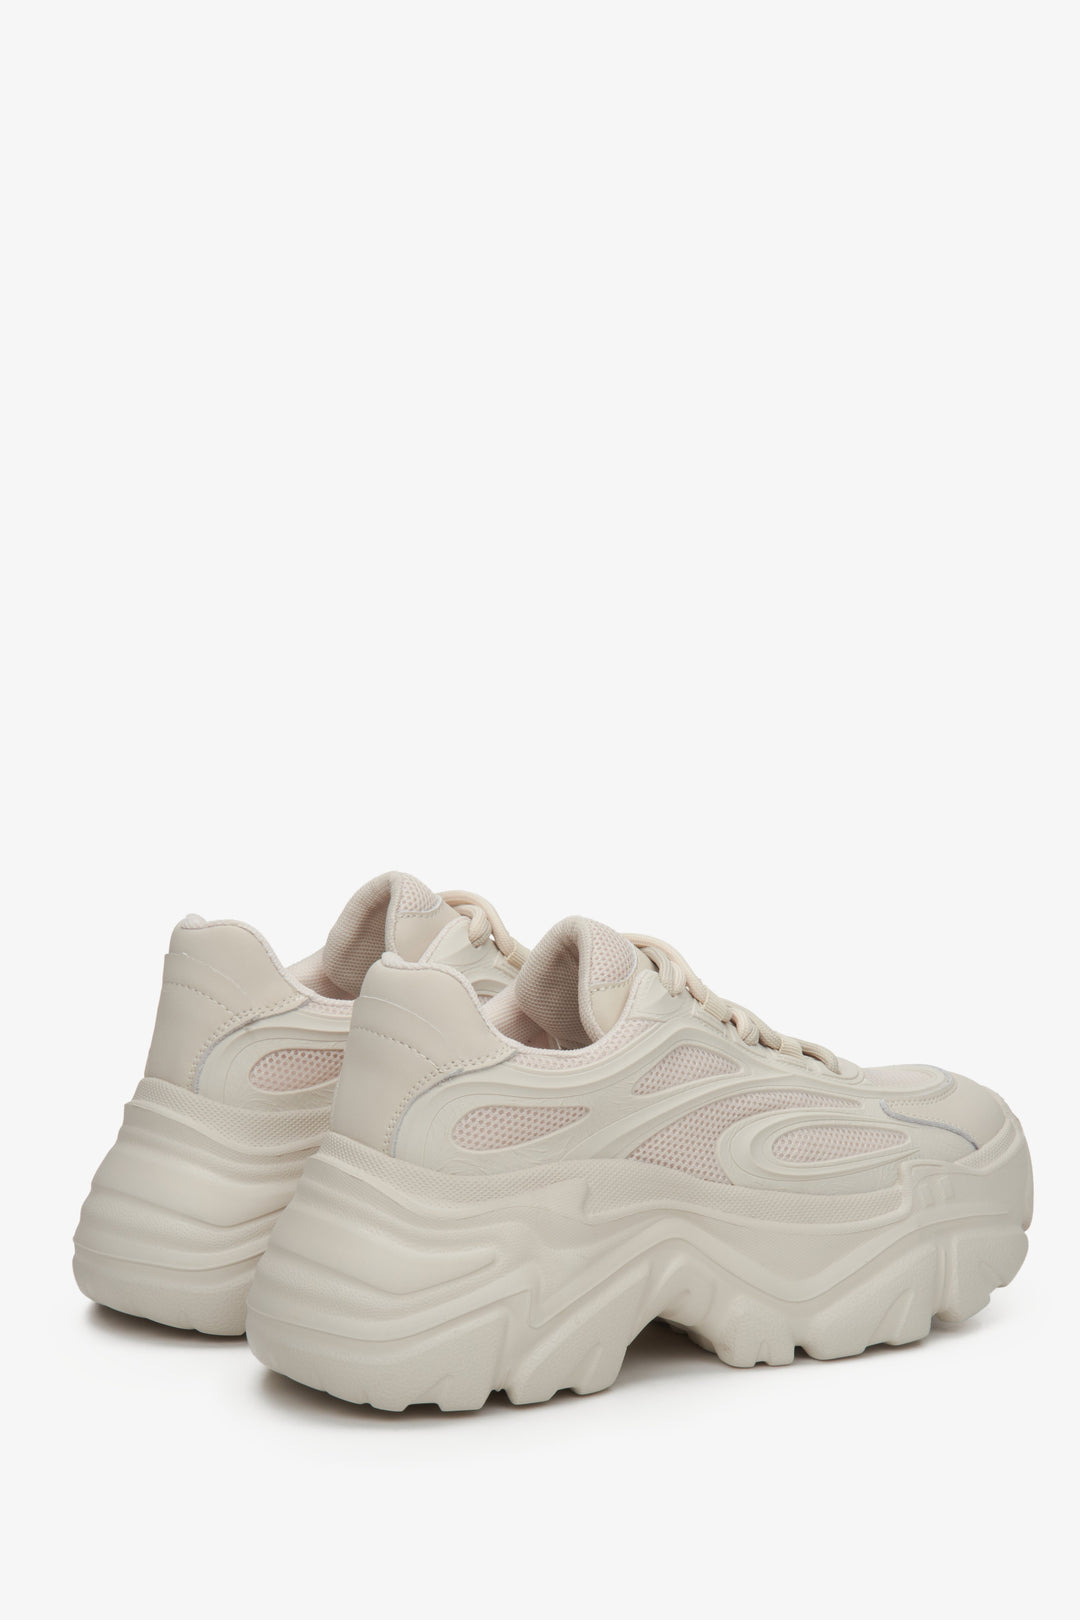 Beige chunky platform sneakers by ES 8 made of leather and textile.